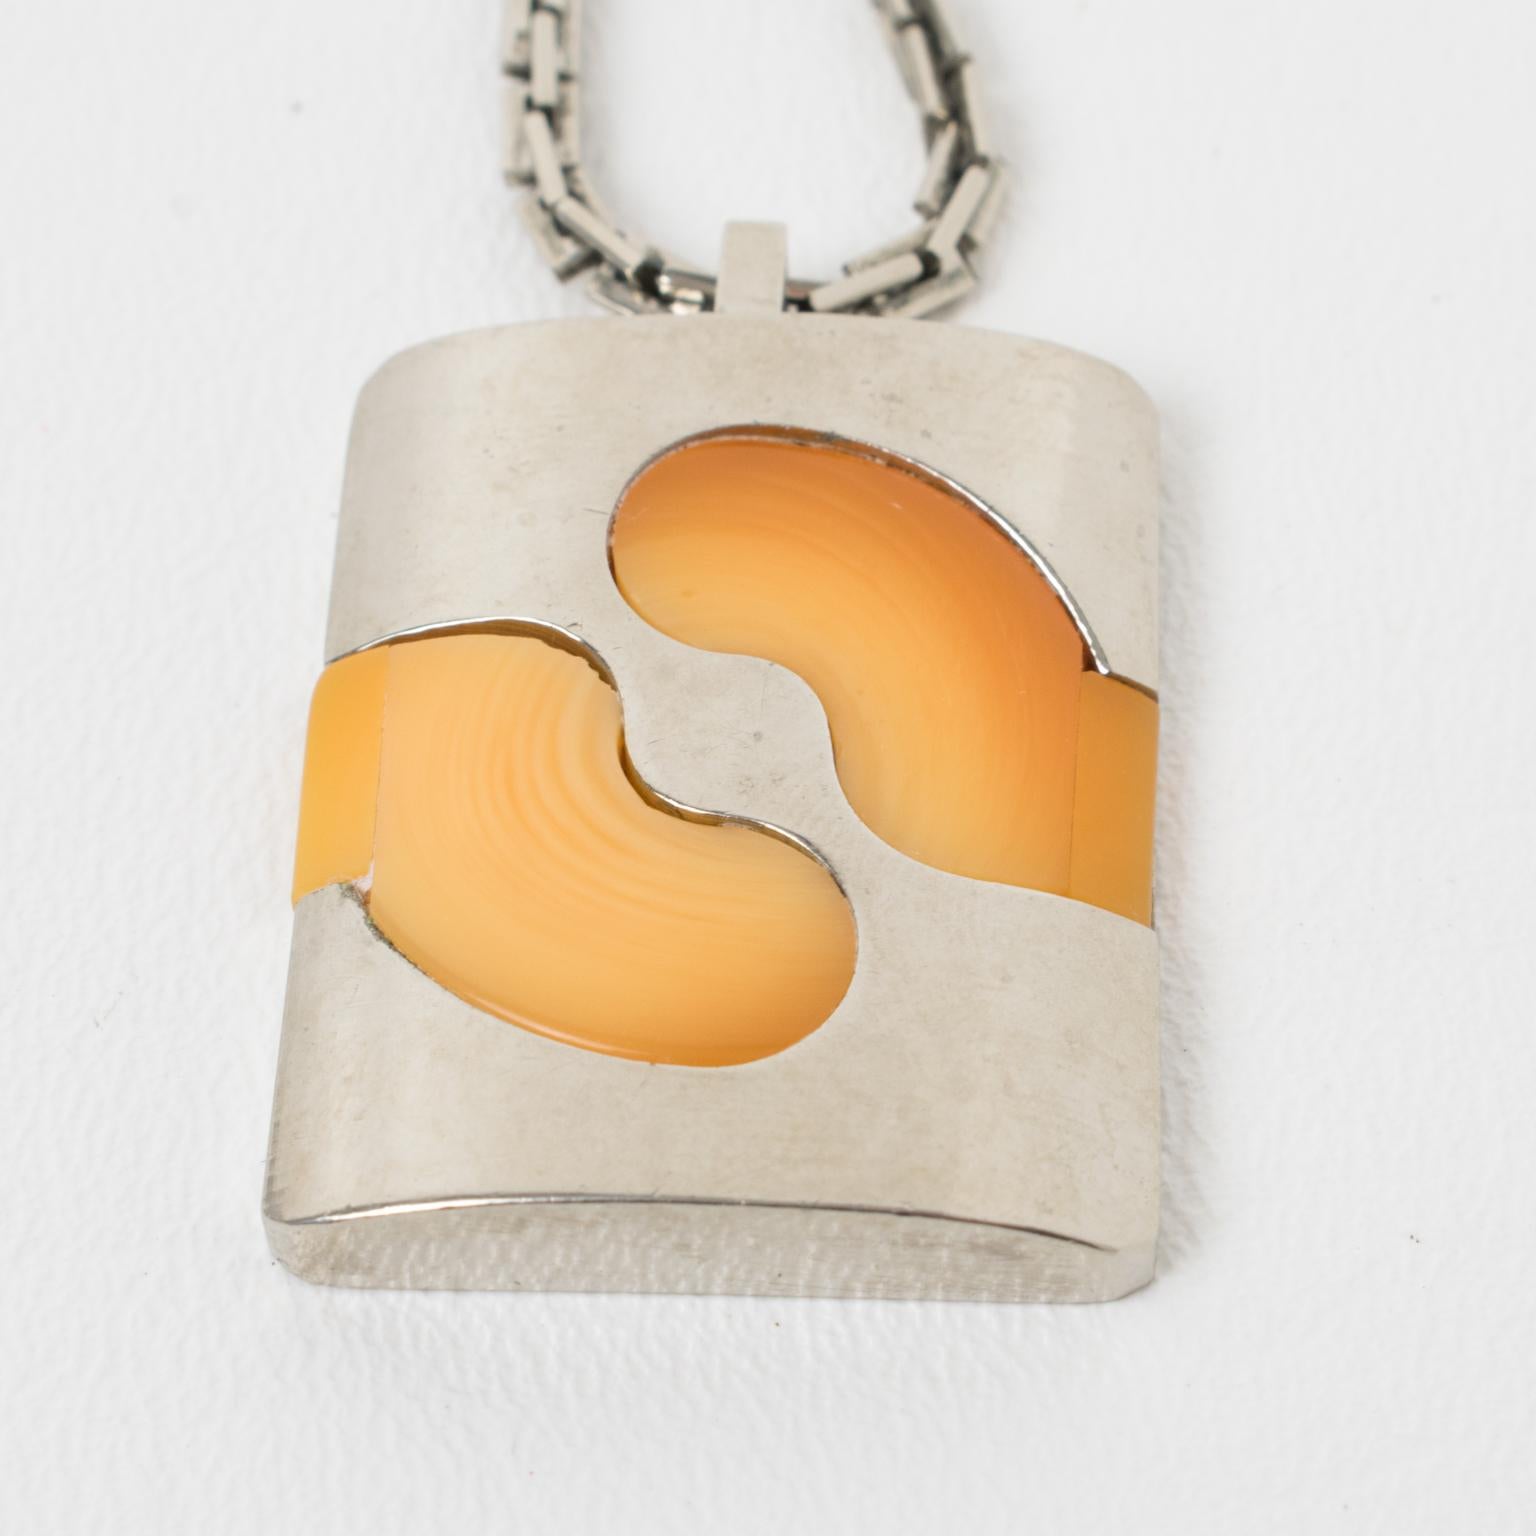 Pierre Cardin Modernist Silvered  and Yellow Resin Pendant Necklace, 1970s For Sale 2